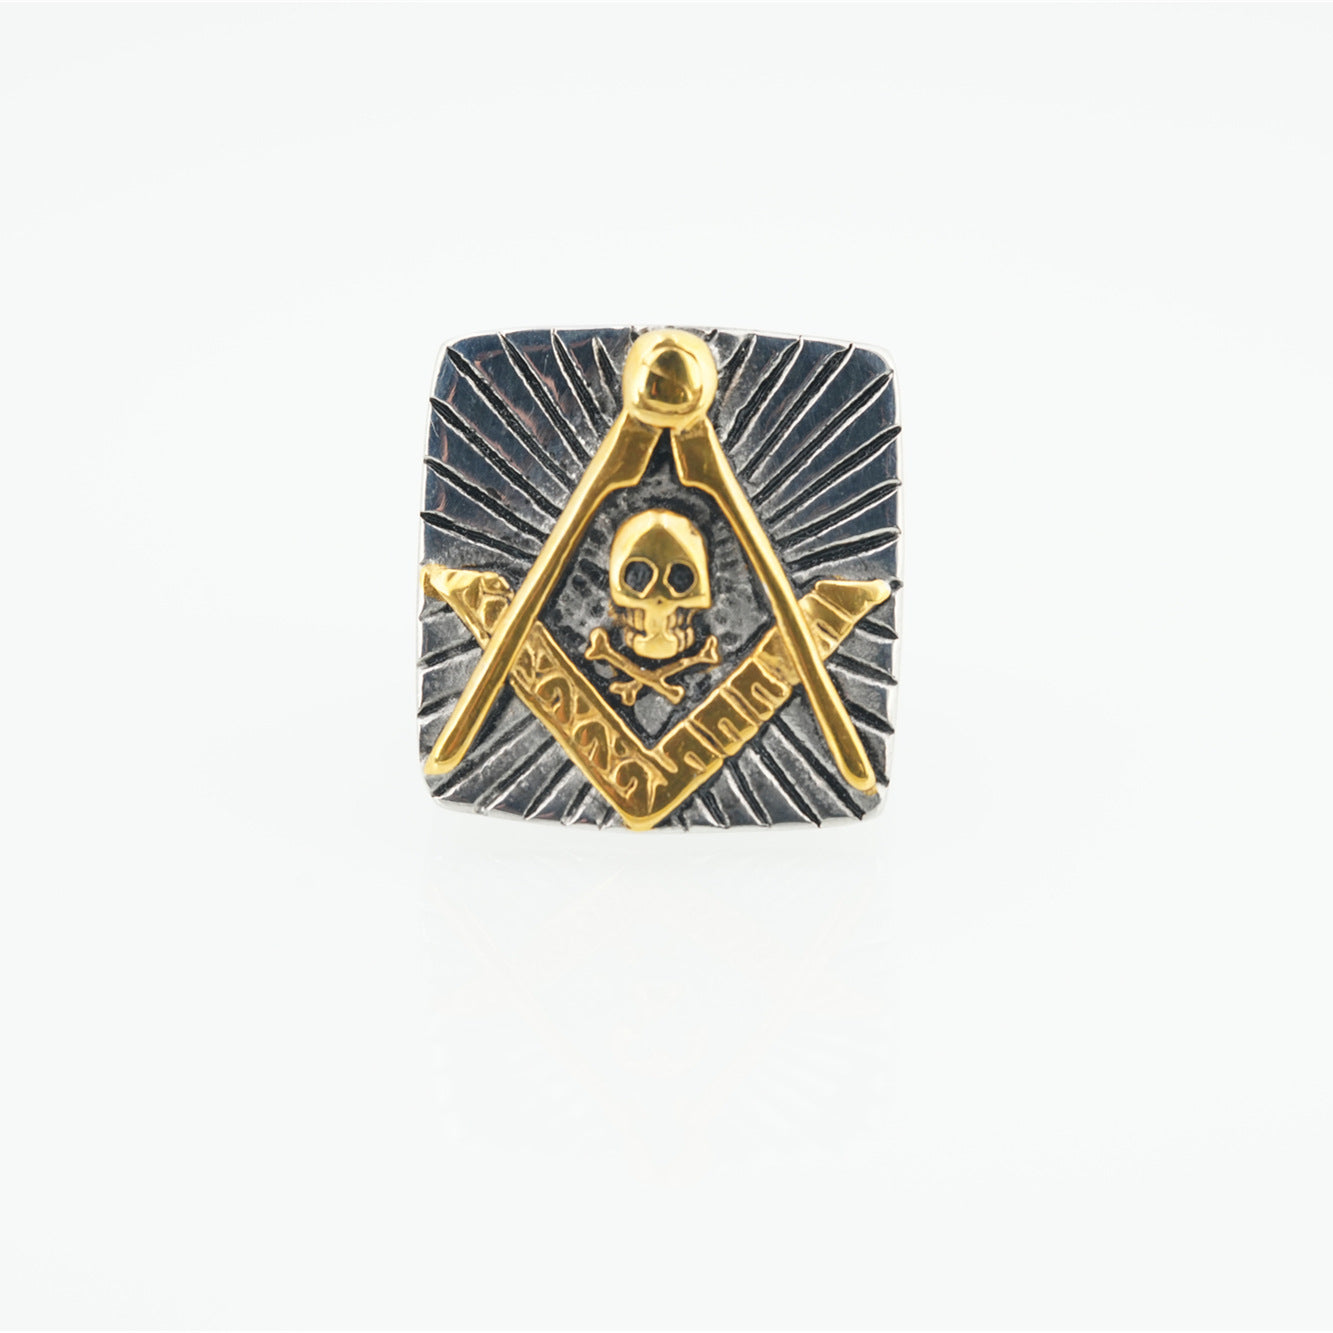 Widows Sons Ring - Silver And Gold Square & Compass With Skull Inside - Bricks Masons